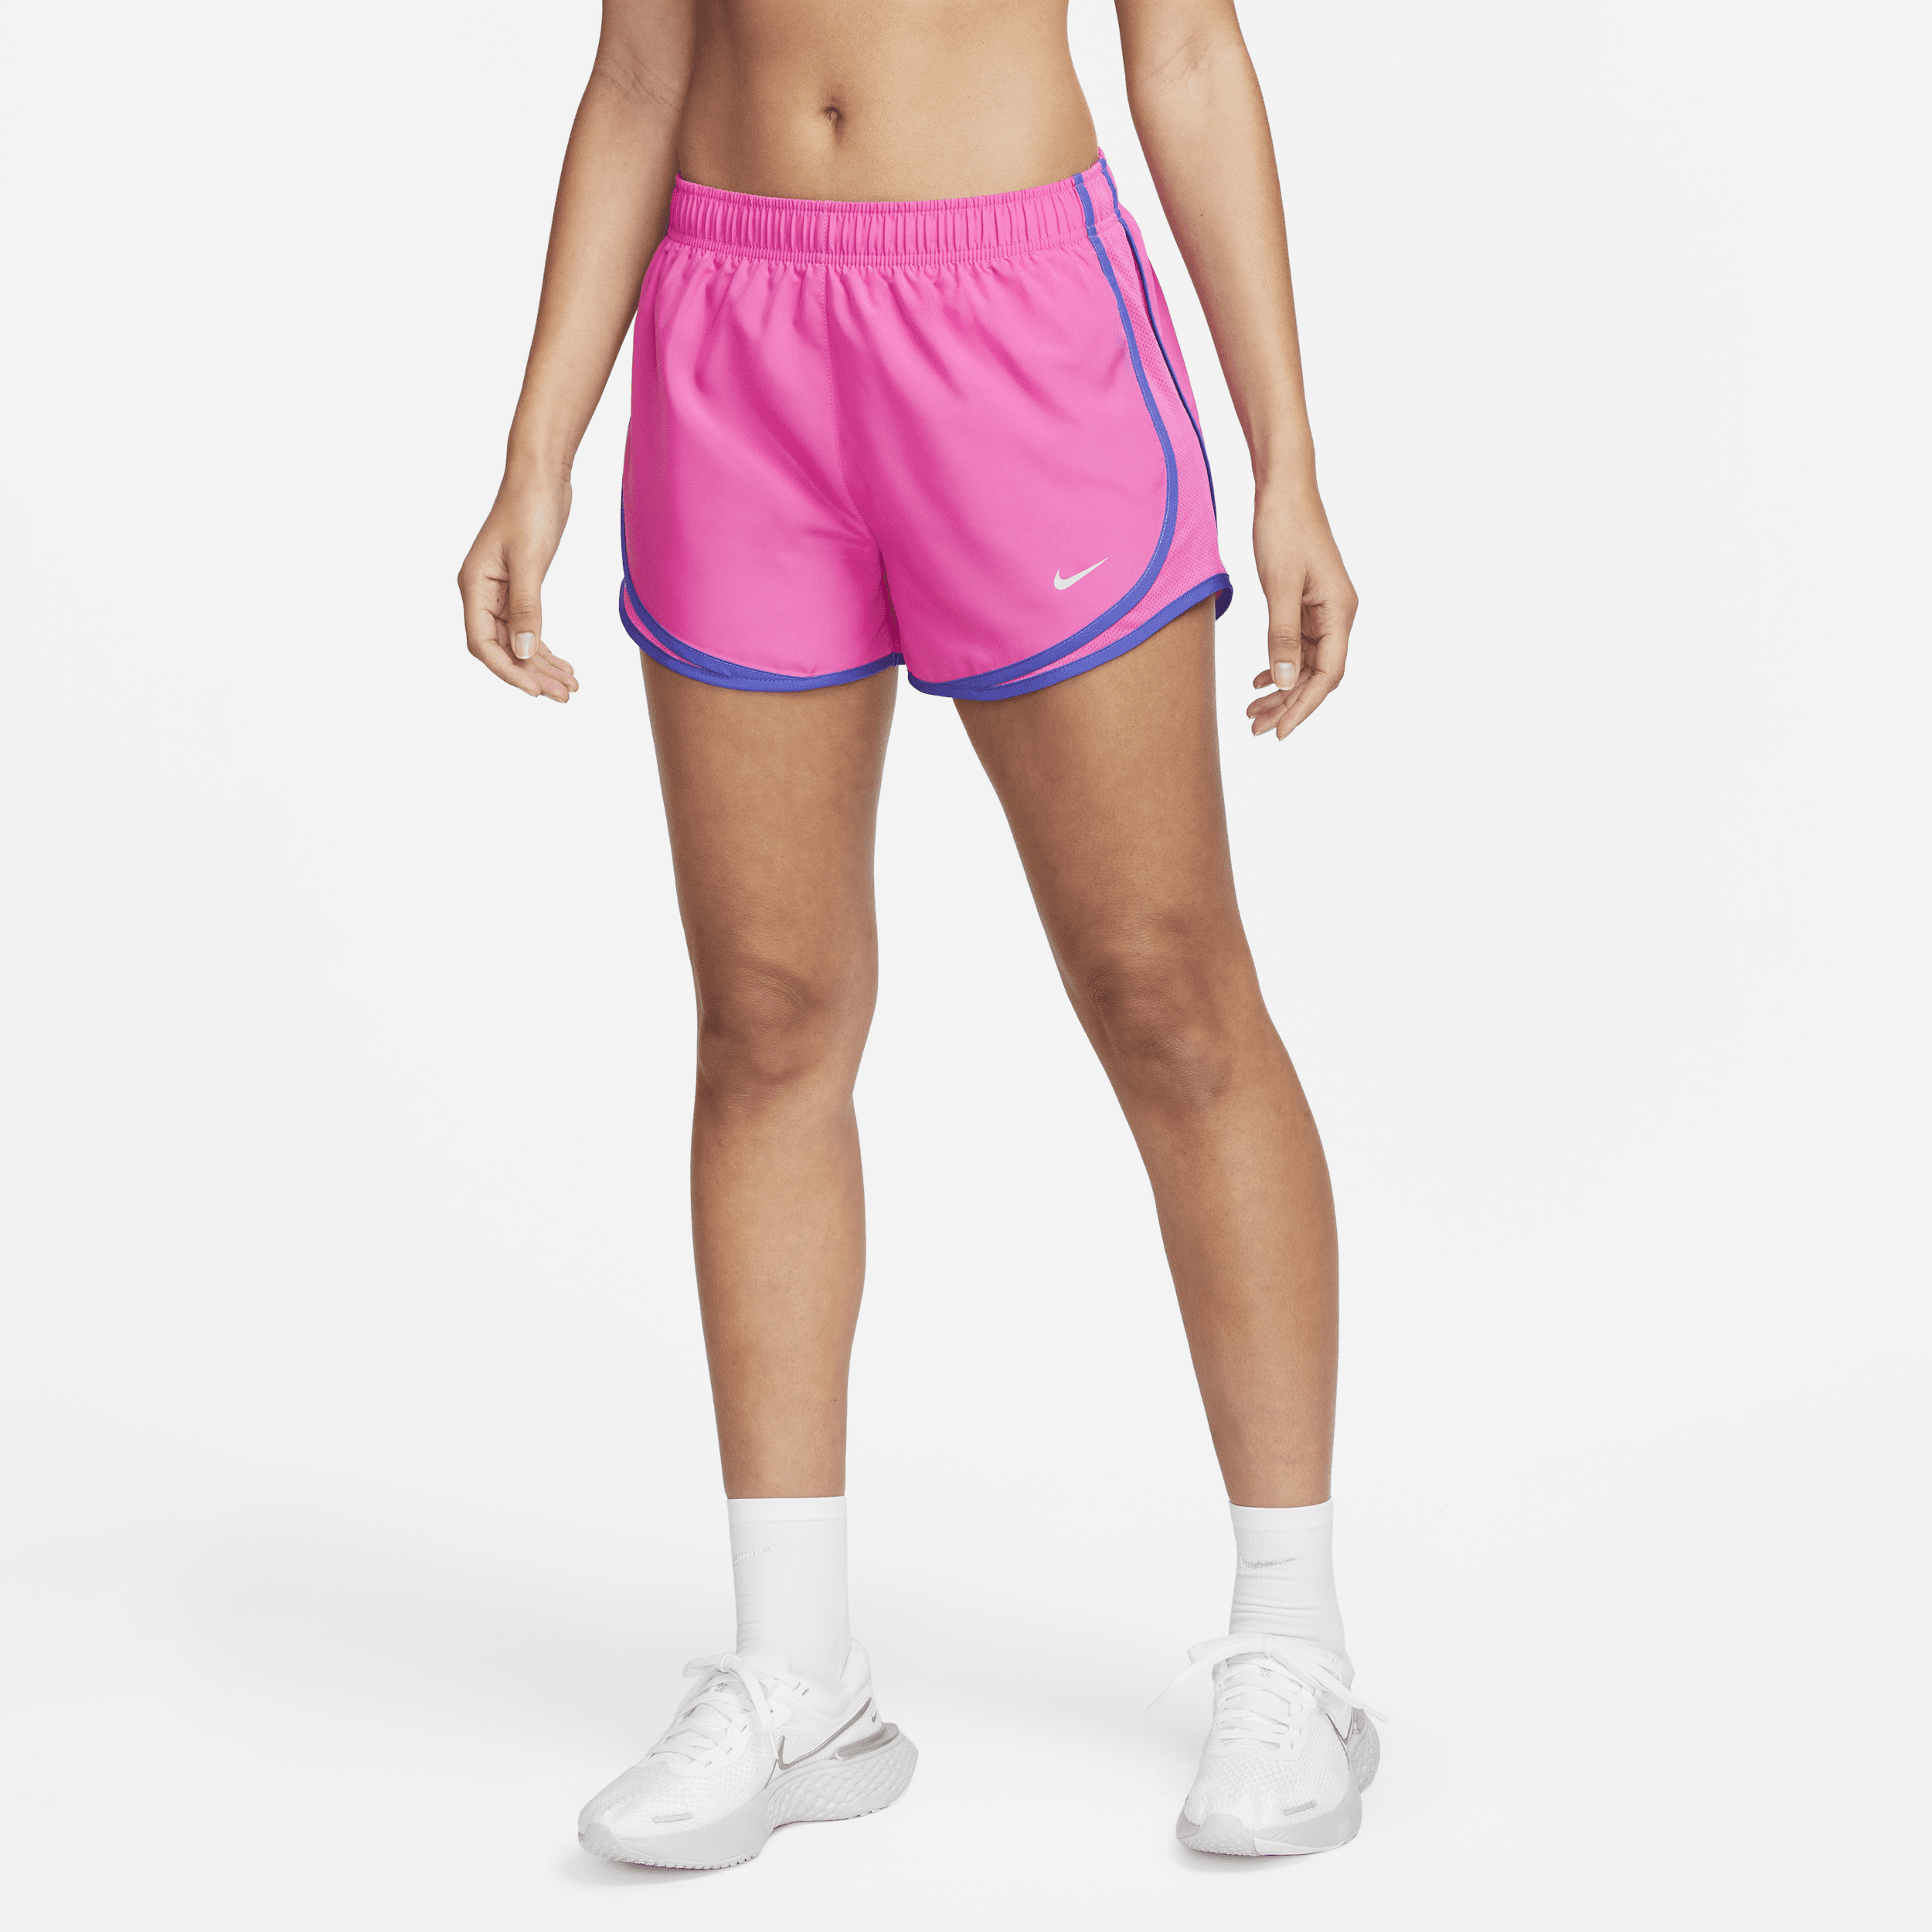 NIKE WOMEN'S TEMPO BRIEF-LINED RUNNING SHORTS,1009246176